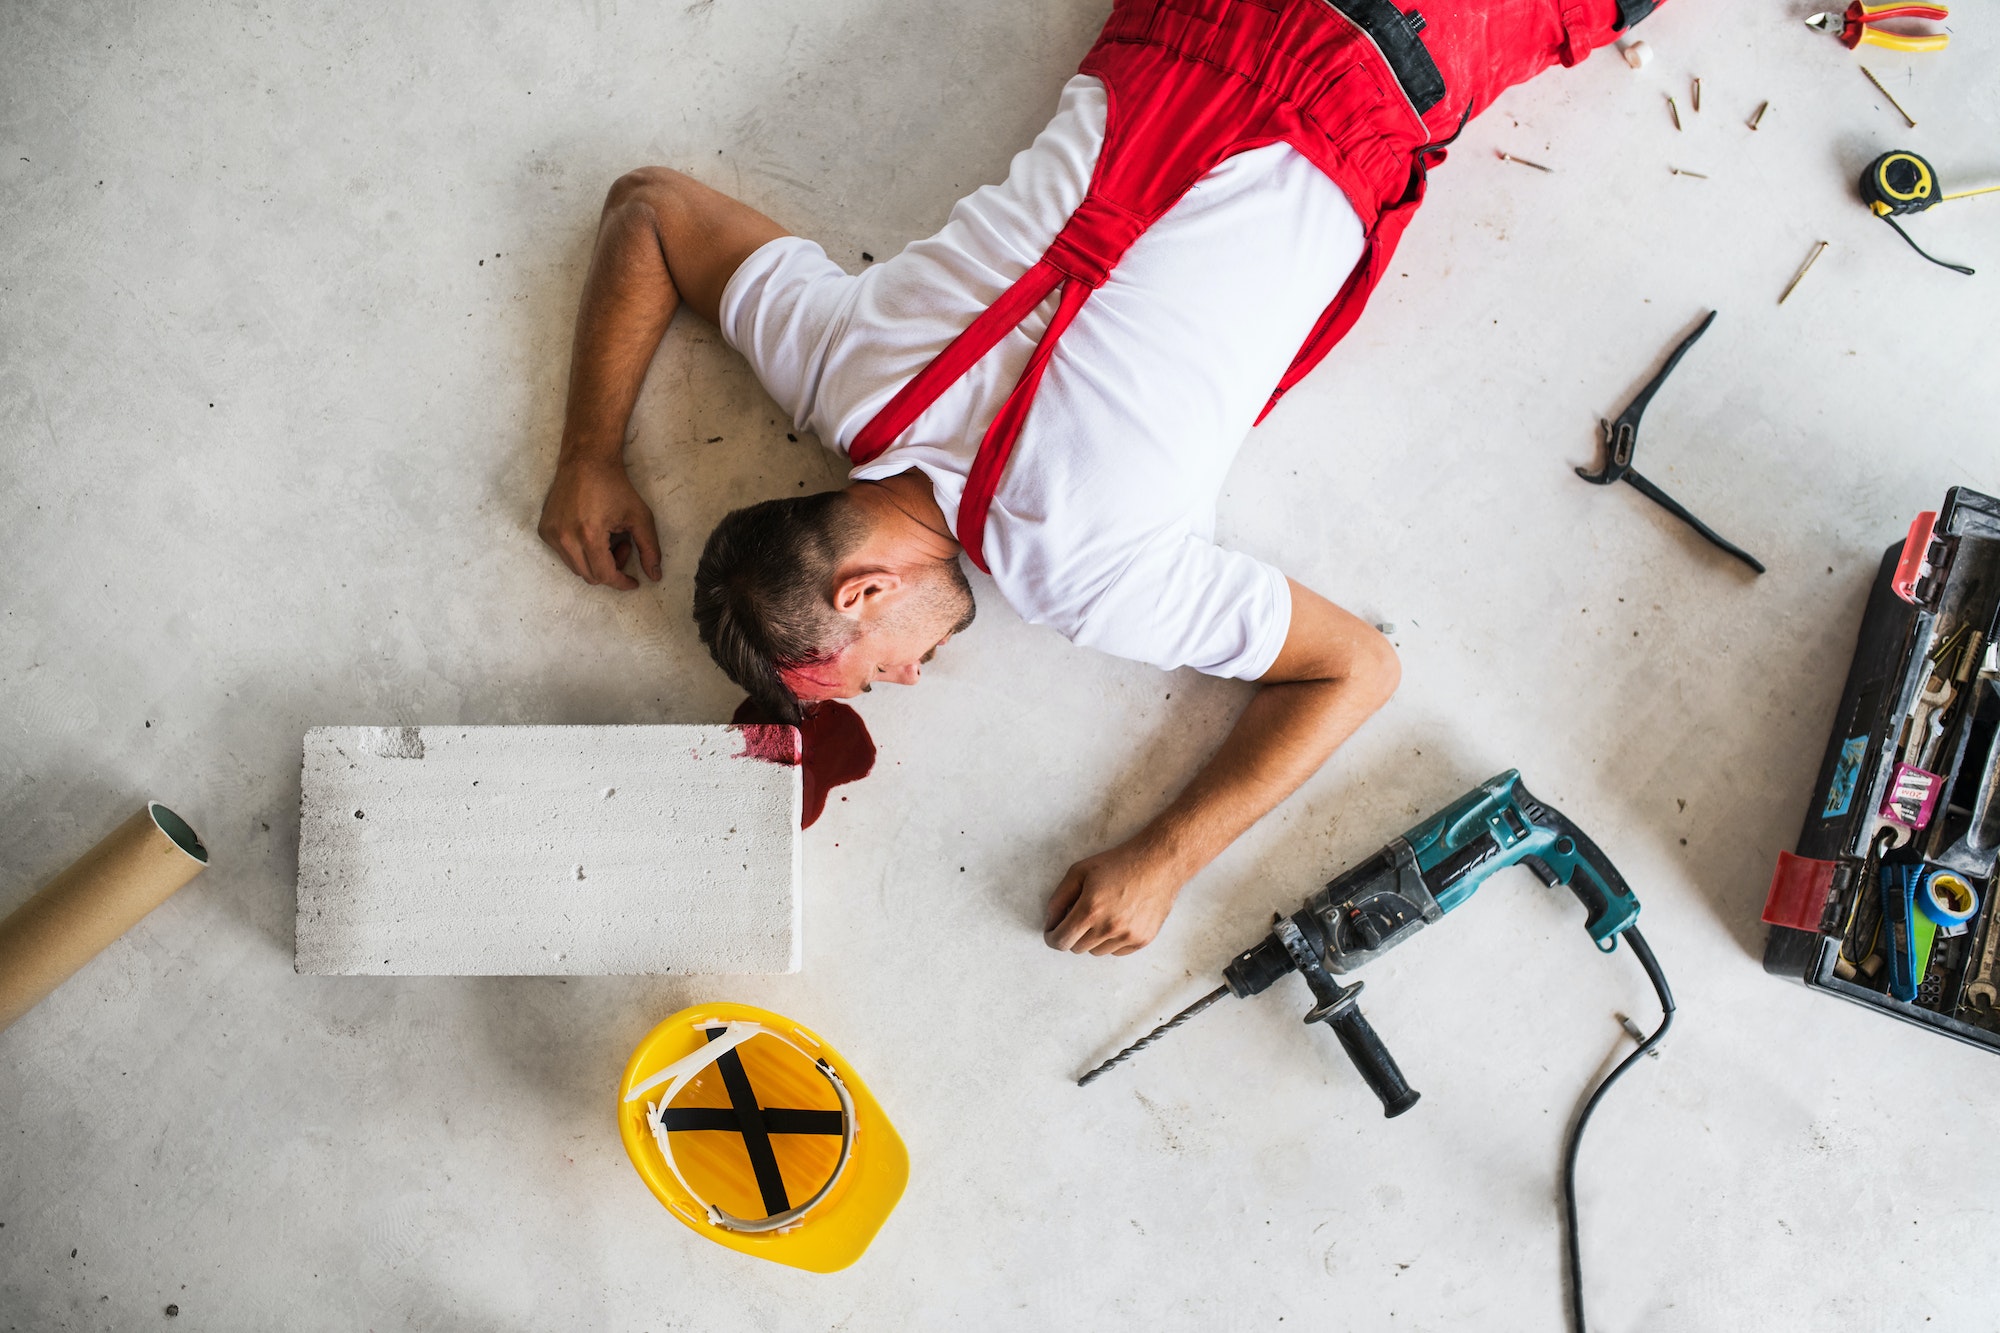 An unconscious man worker lying on the floor after accident on the construction site.